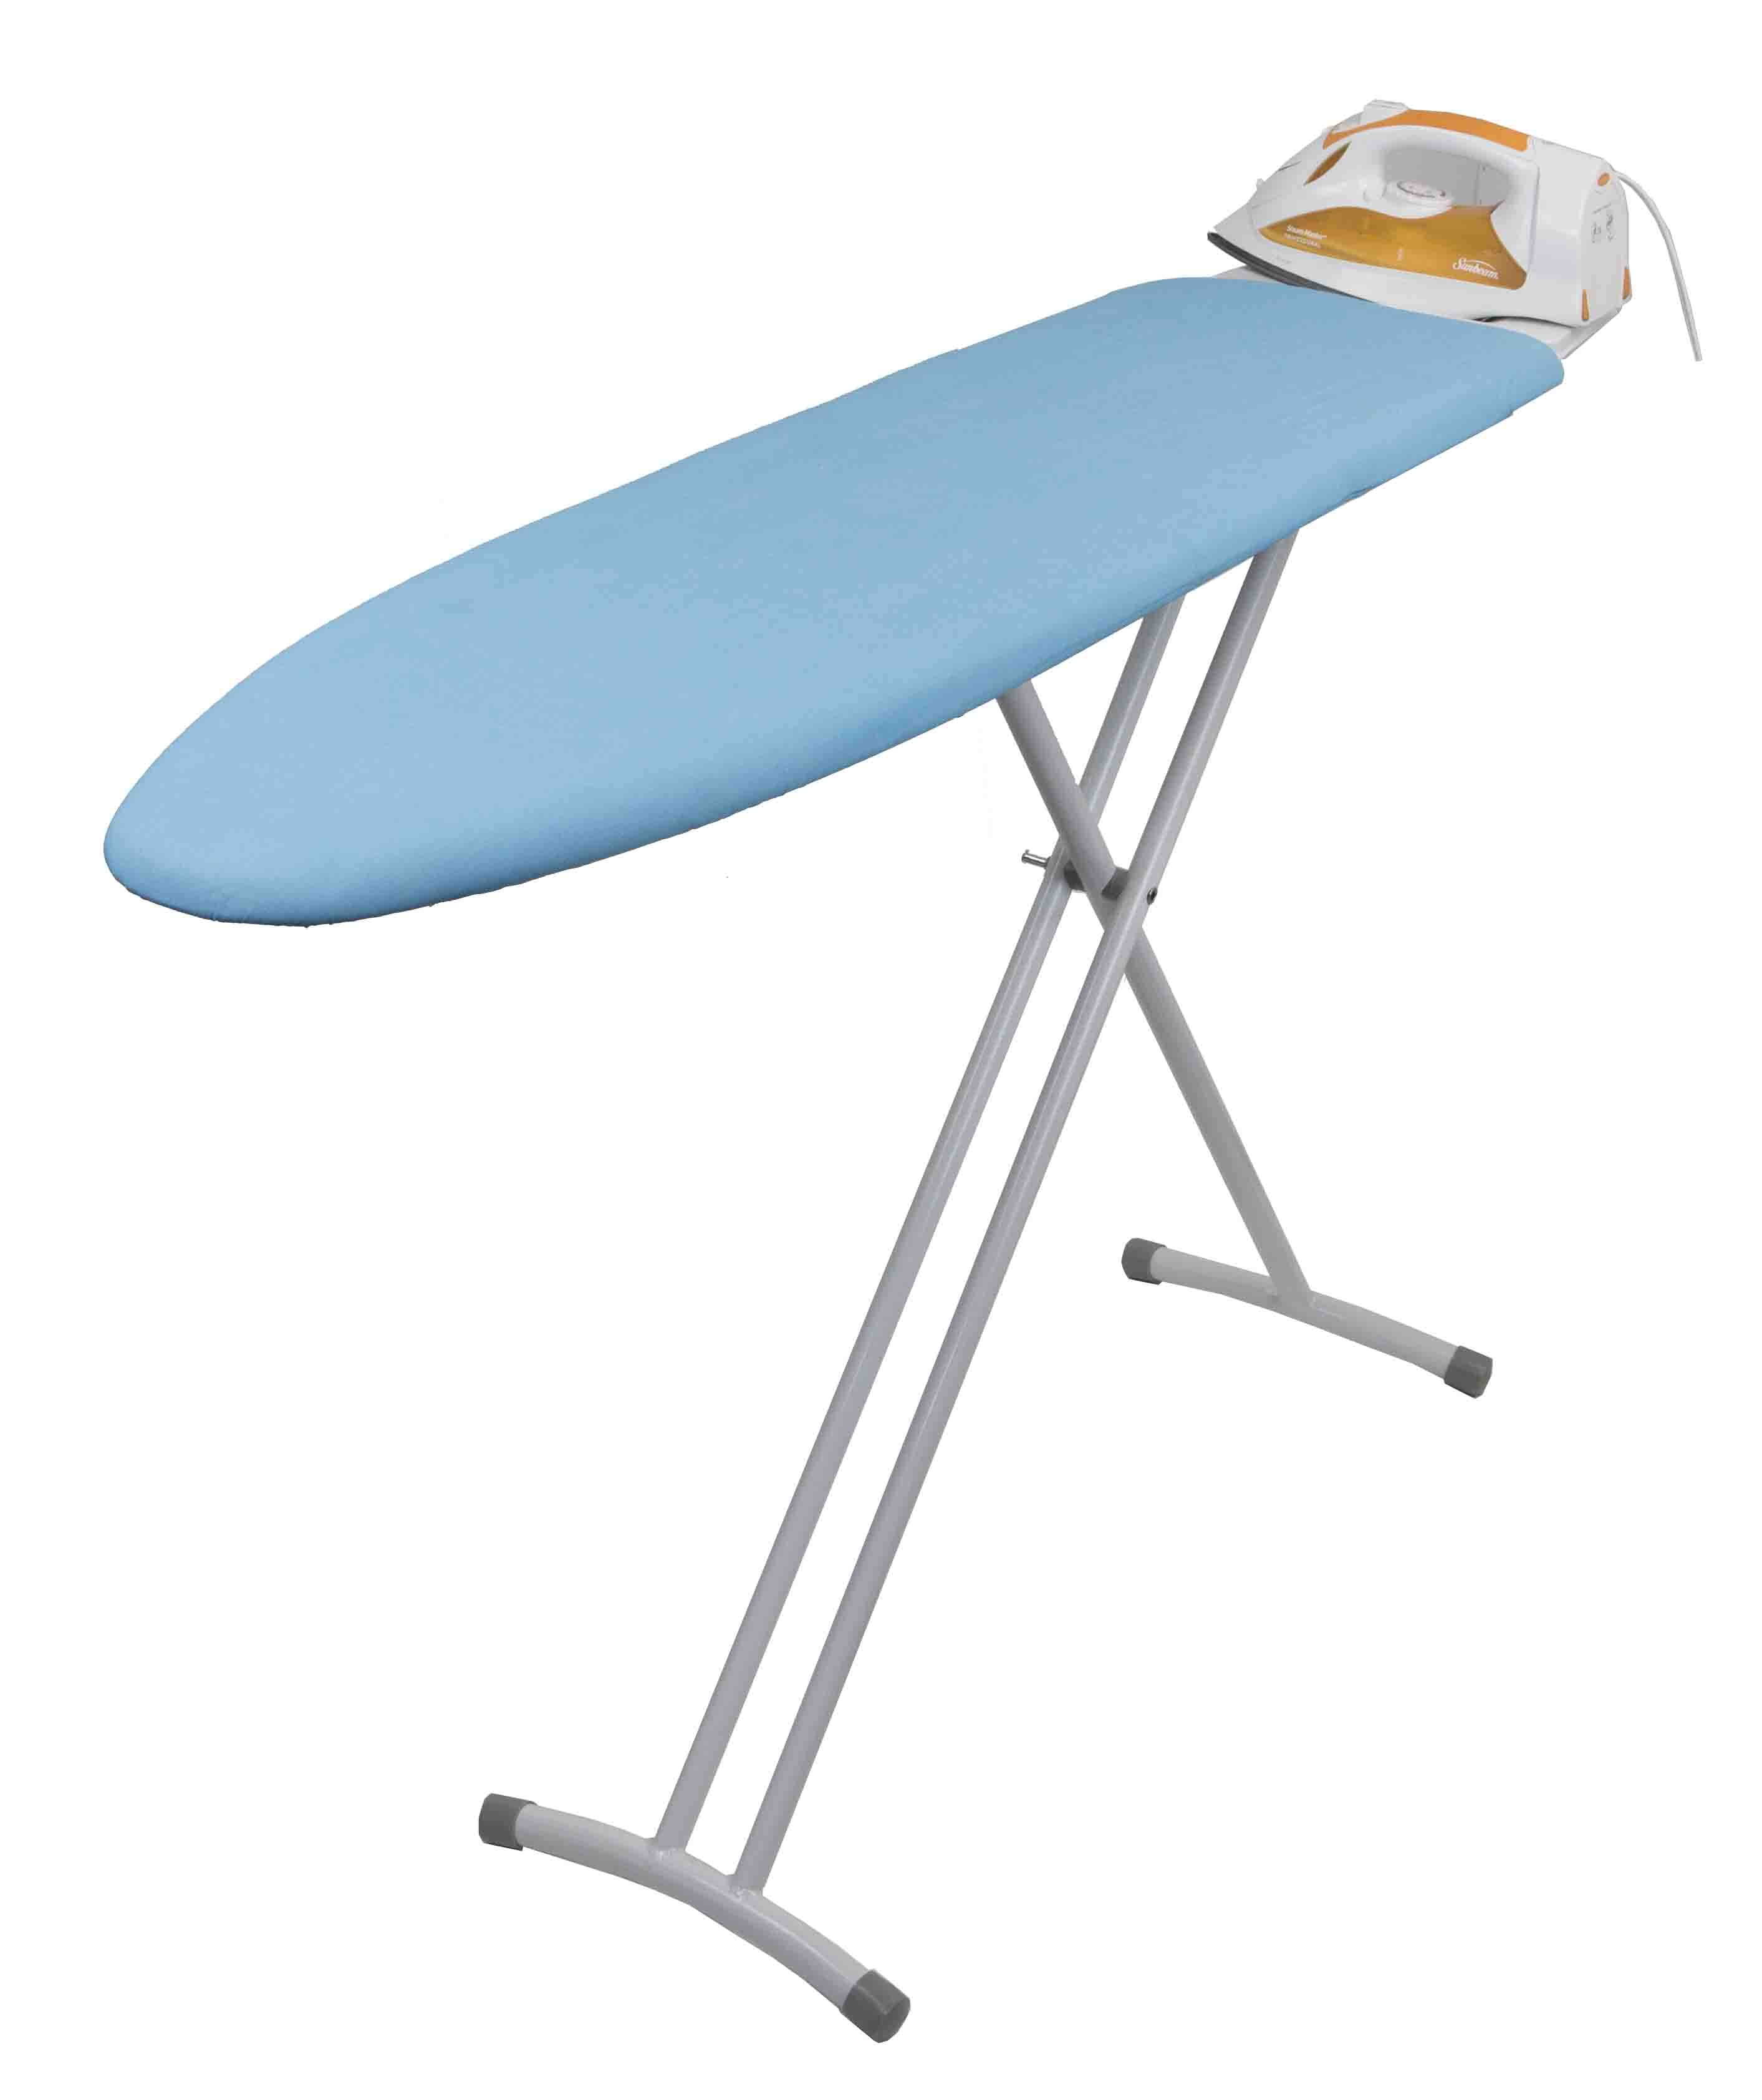 Sunbeam Tabletop Ironing Board with Rest and Cover